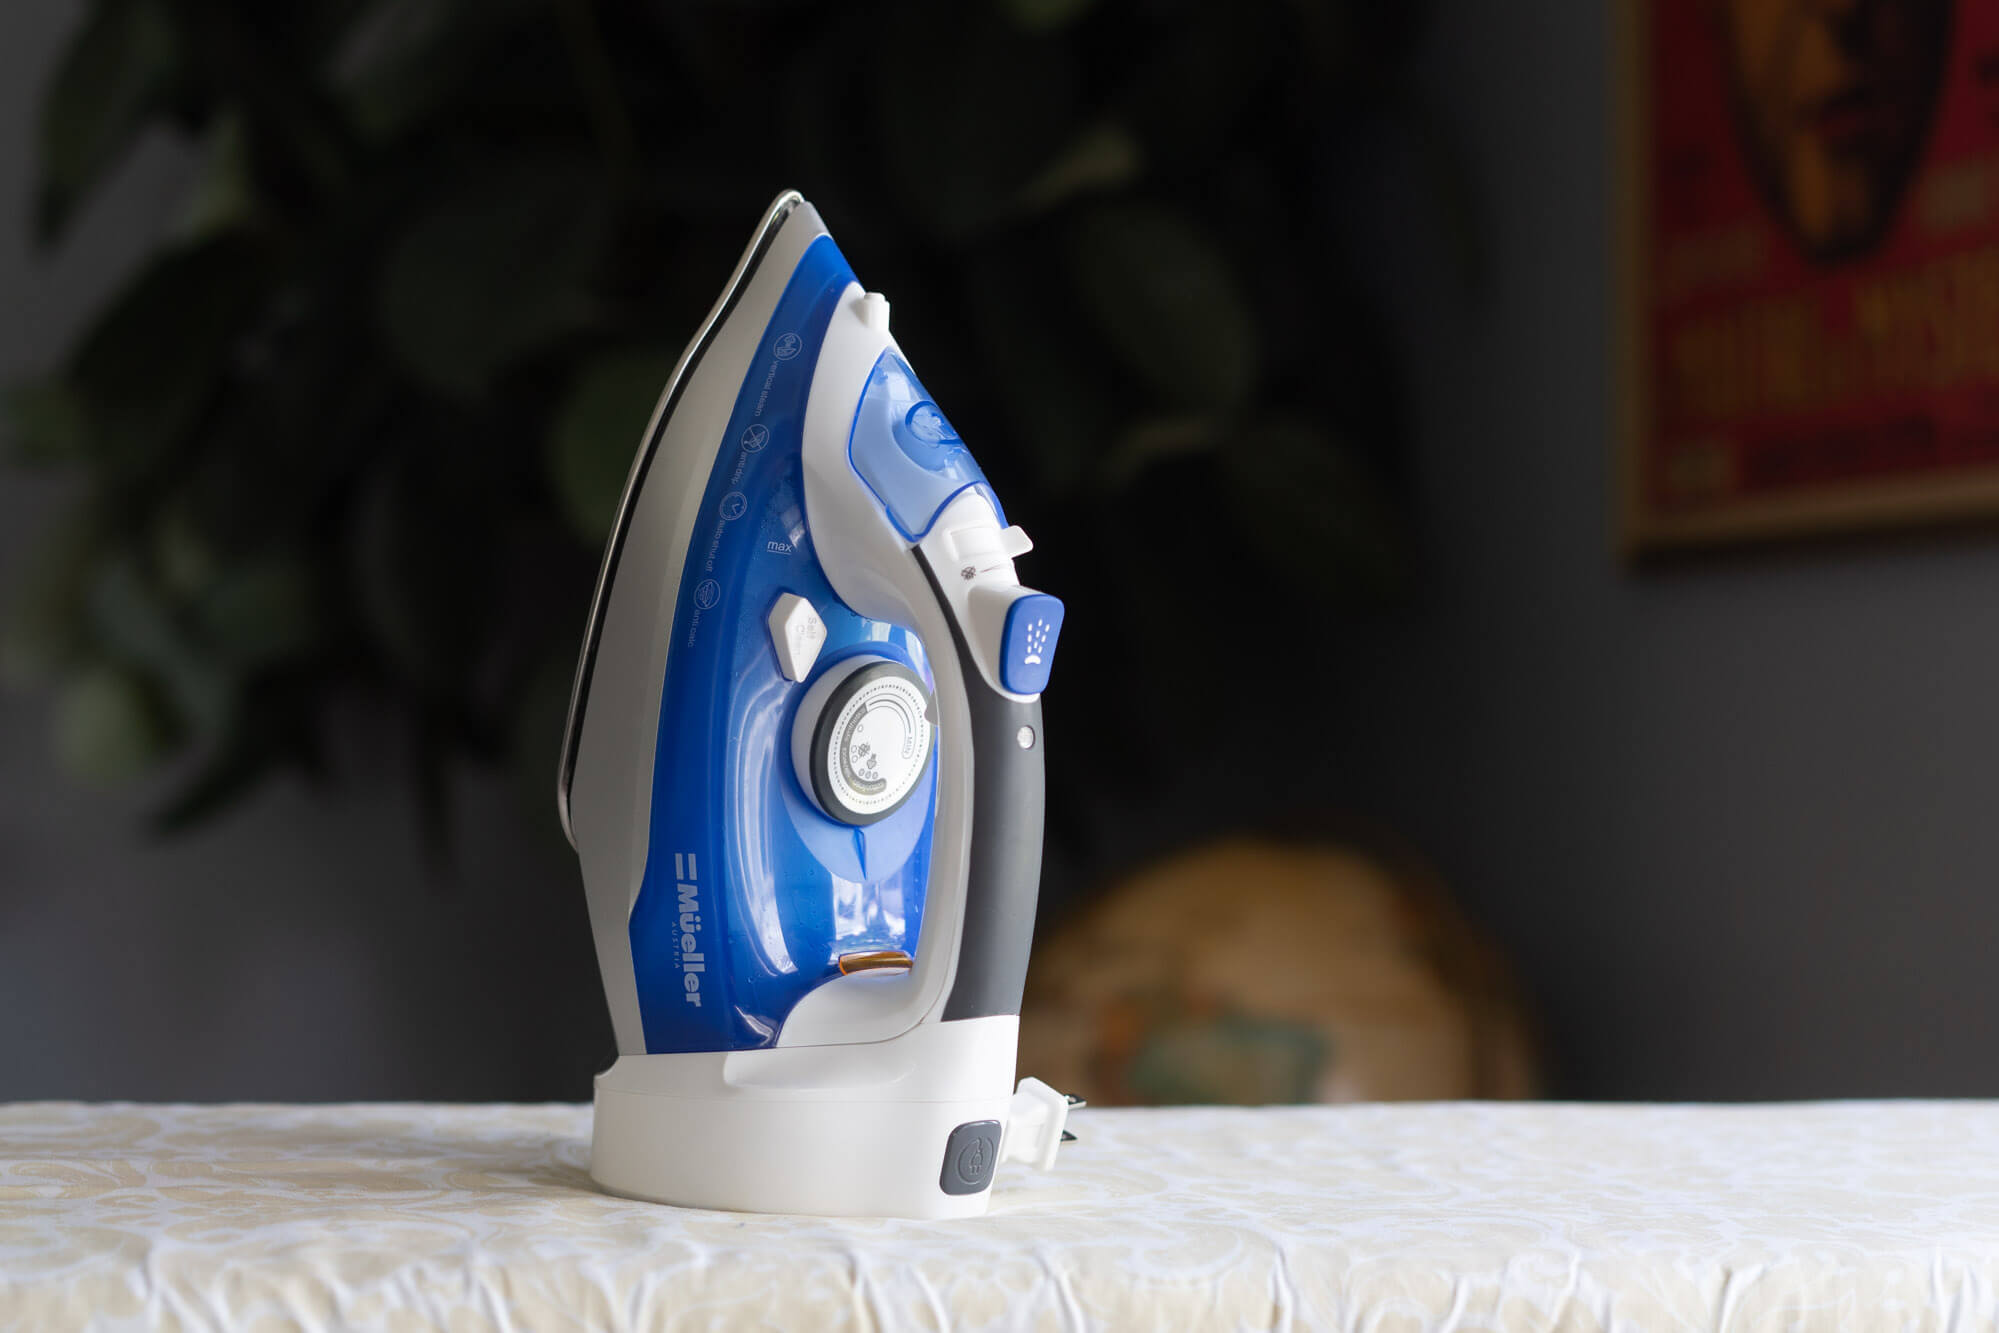 Best Pressing Cloth for Ironing and Protection Review - Best Steam Iron  Reviews